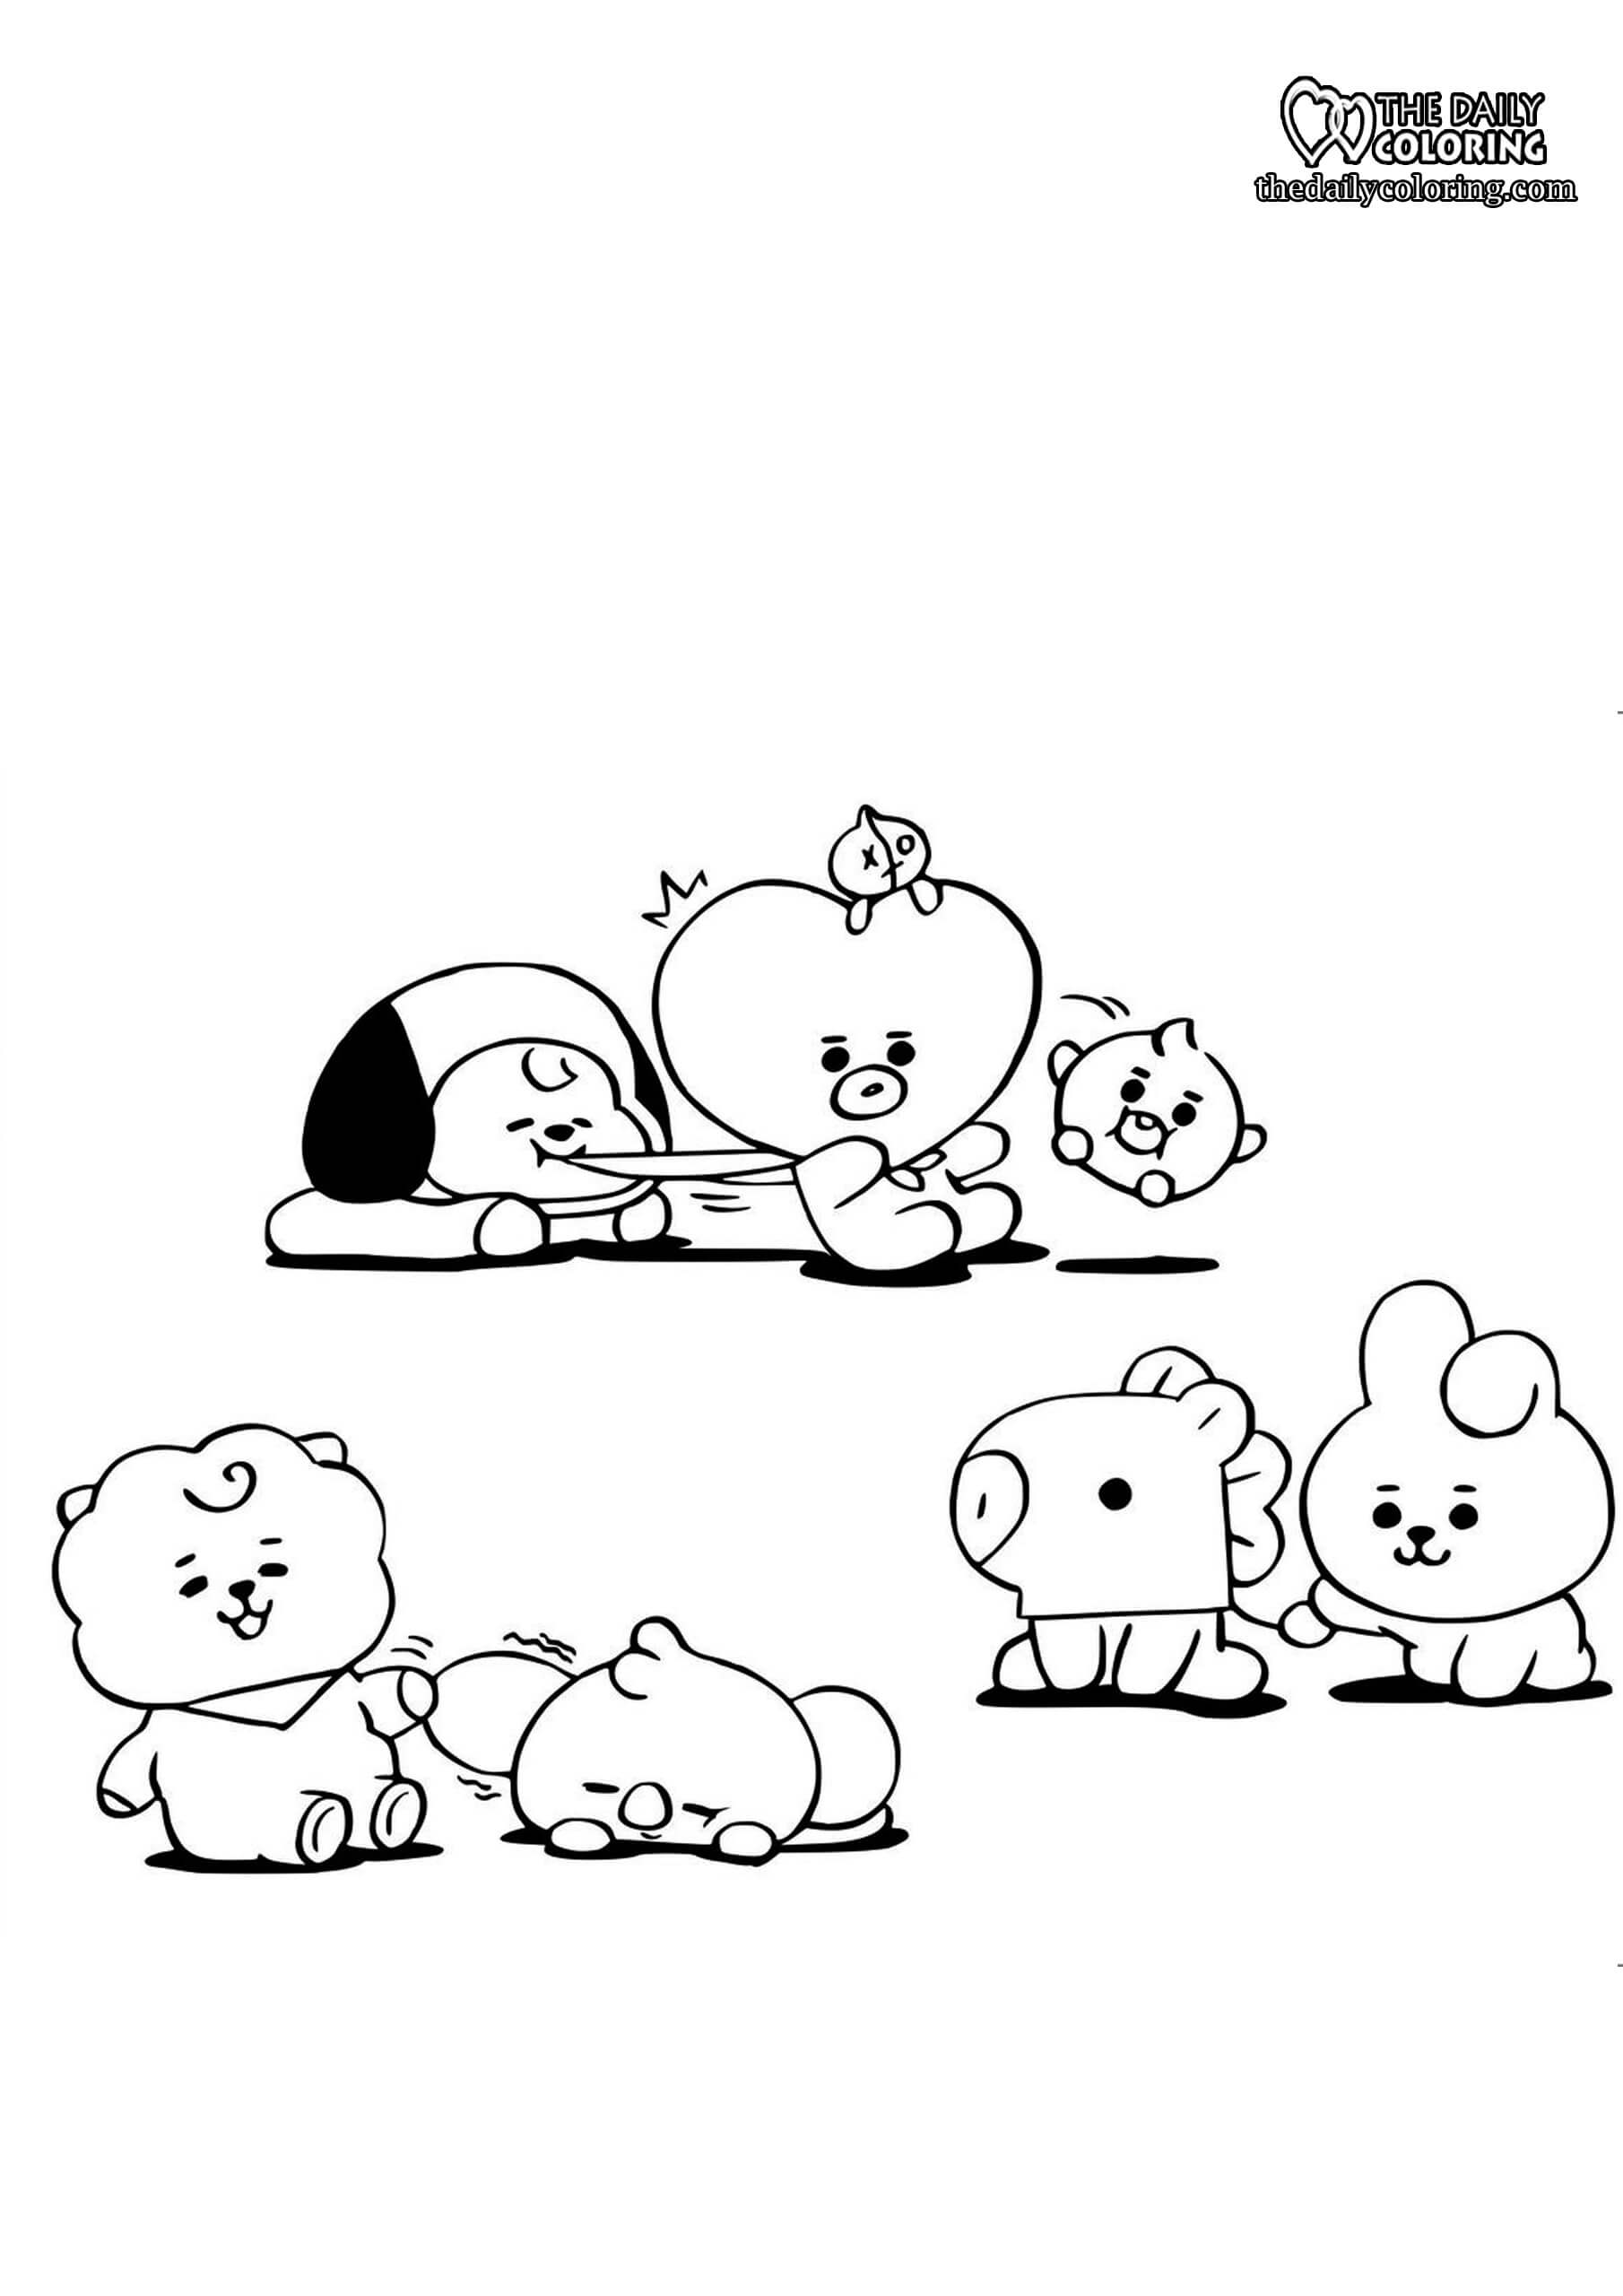 bt21-coloring-page